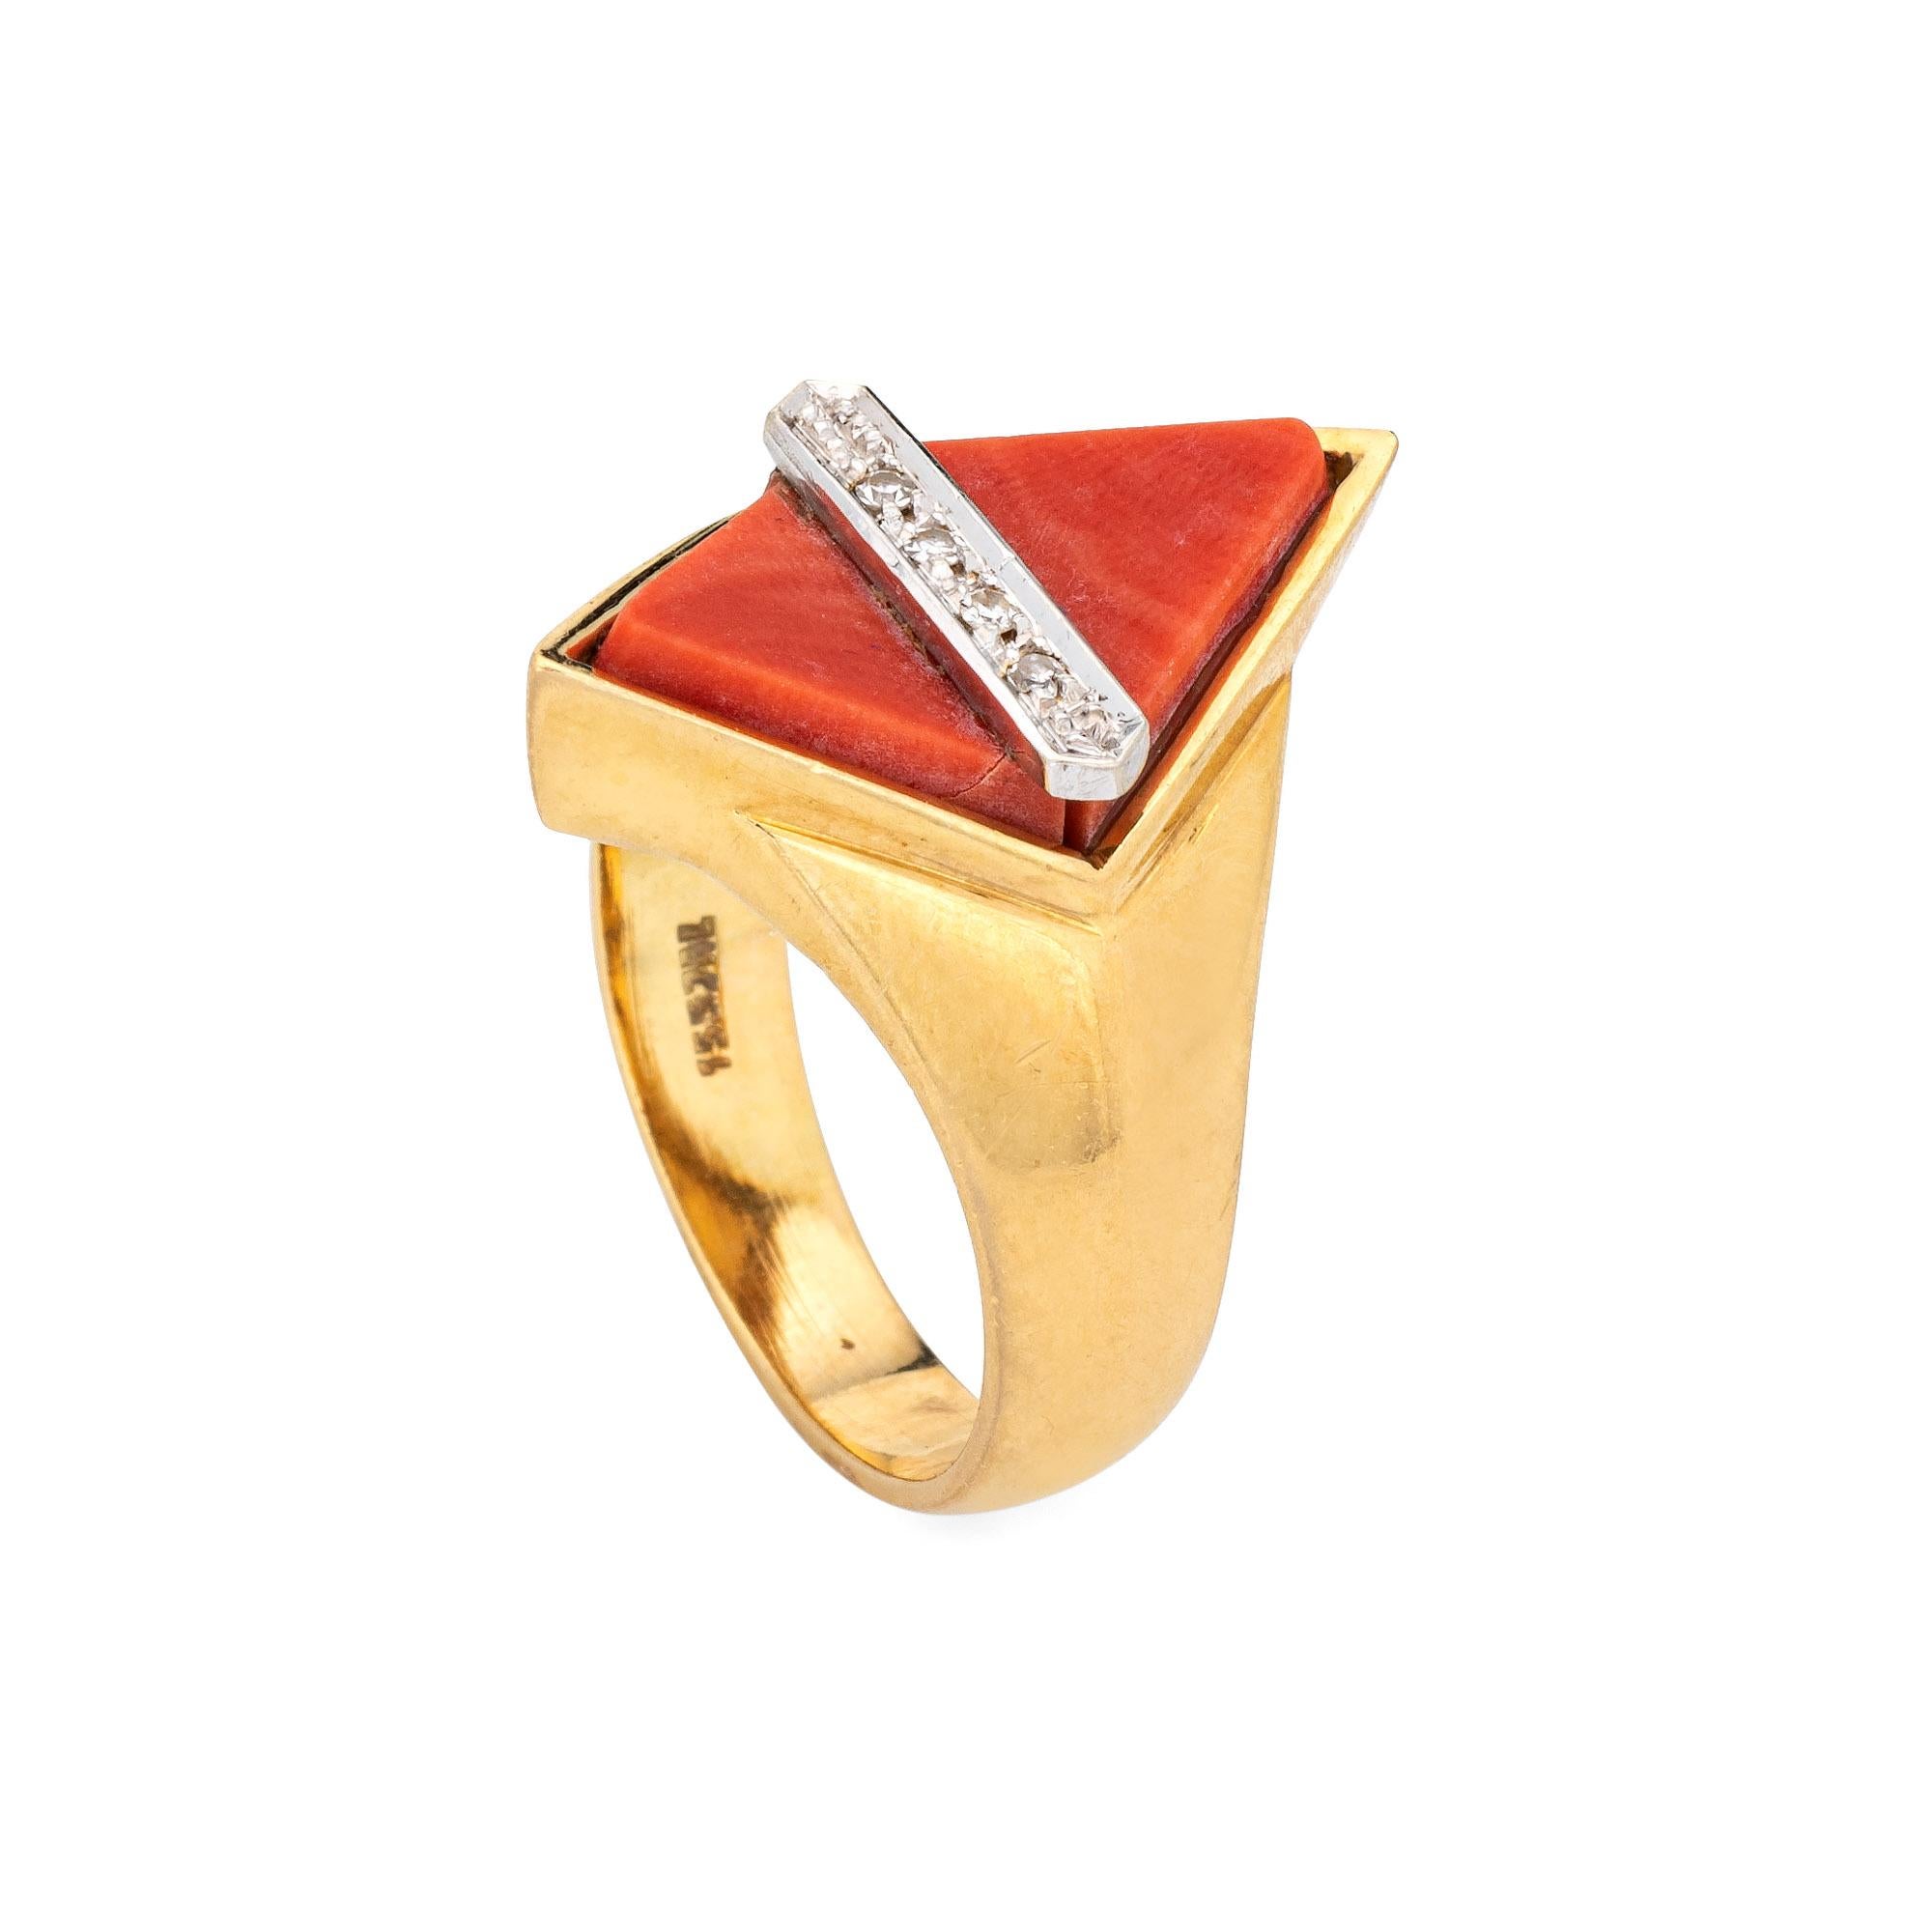 Stylish vintage coral & diamond cocktail ring crafted in 18 karat yellow gold (circa 1970s). 

Coral measures 10mm x 7mm, accented with an estimated 0.02 carats of diamonds (estimated at I-J color and SI1-2 clarity) Note: few chips to the coral